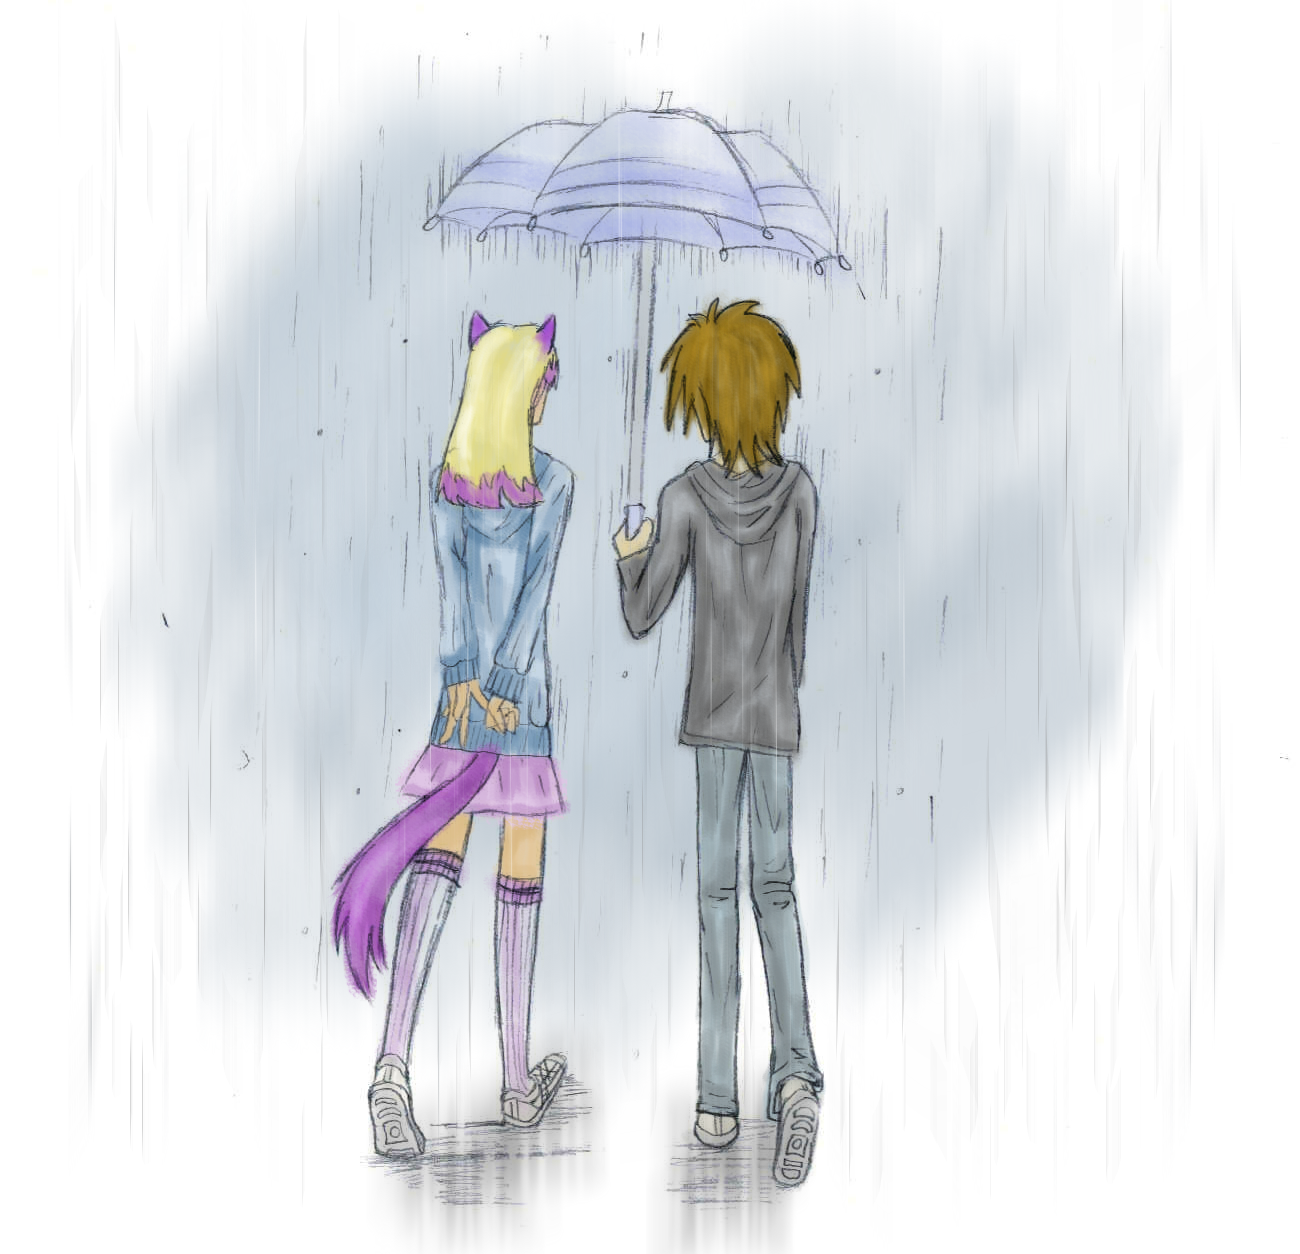 you can stand under my umbrella by TEK